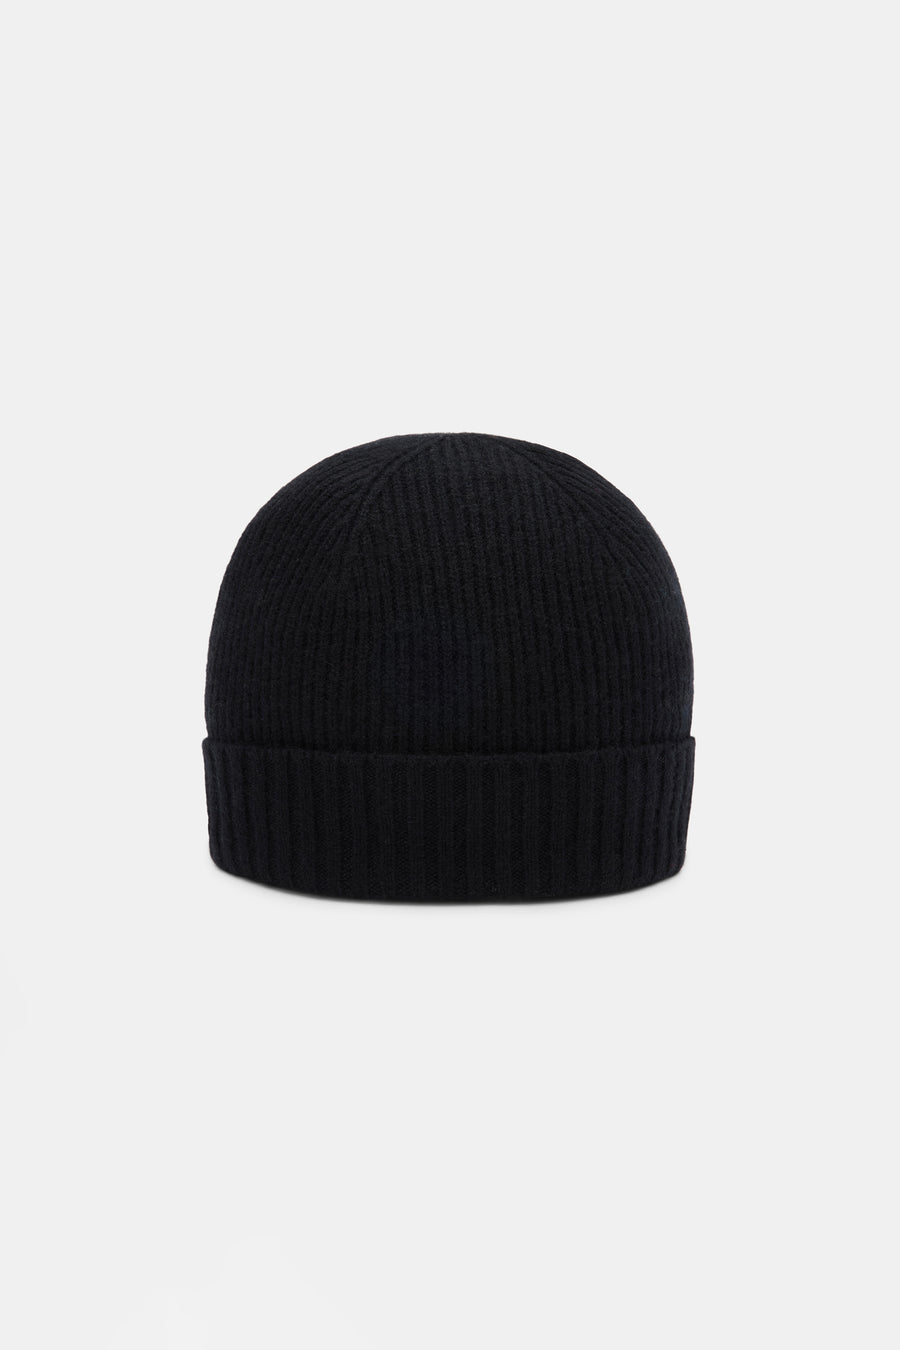 Colby Cashmere Beanie - Licorice